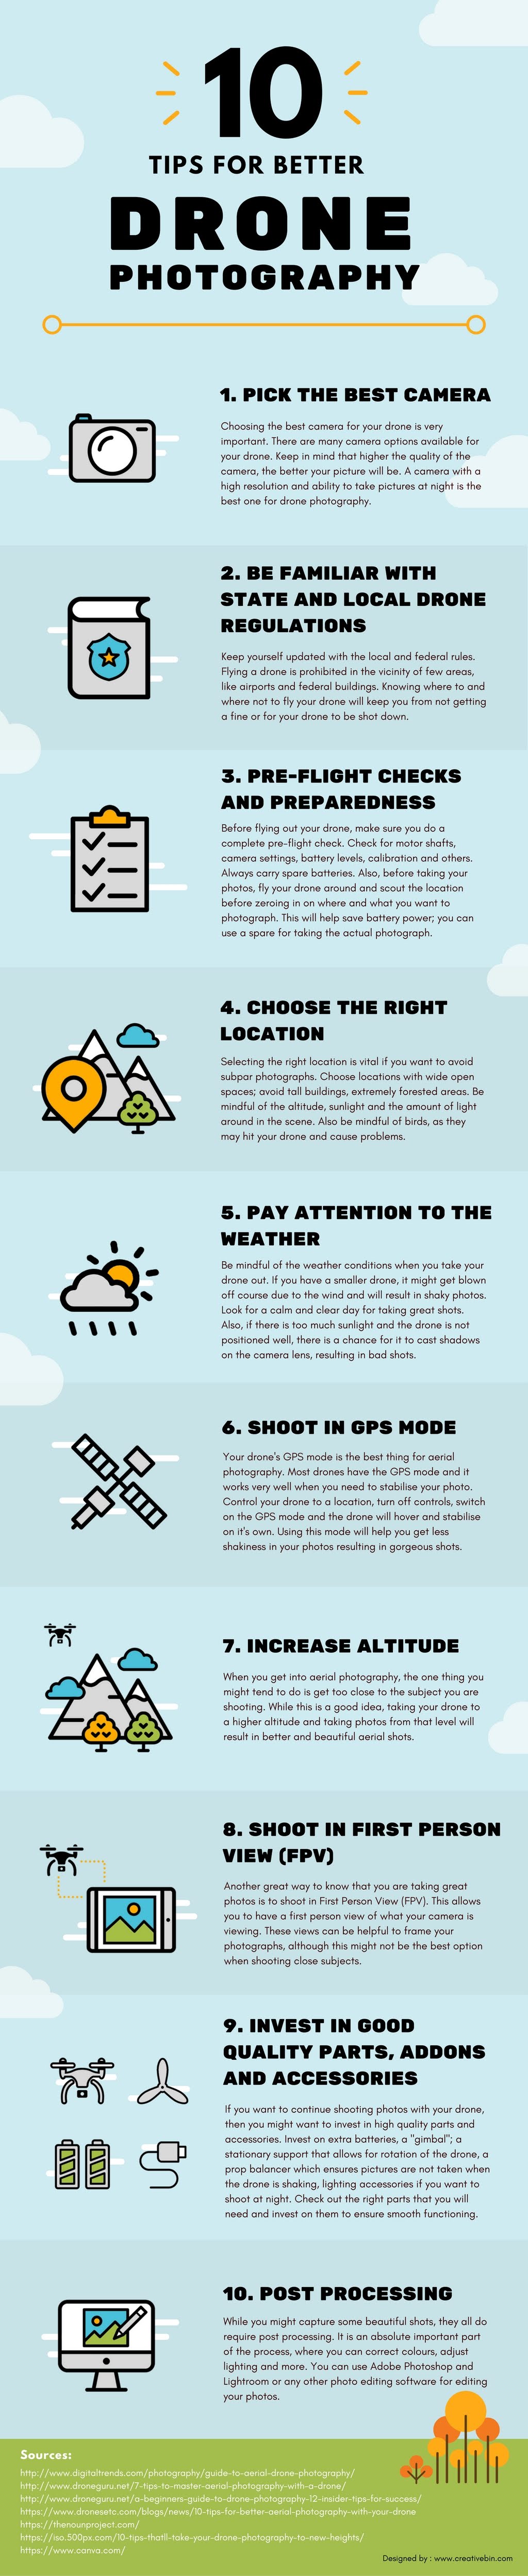 10 Tips For Better Drone Photography #infographic 